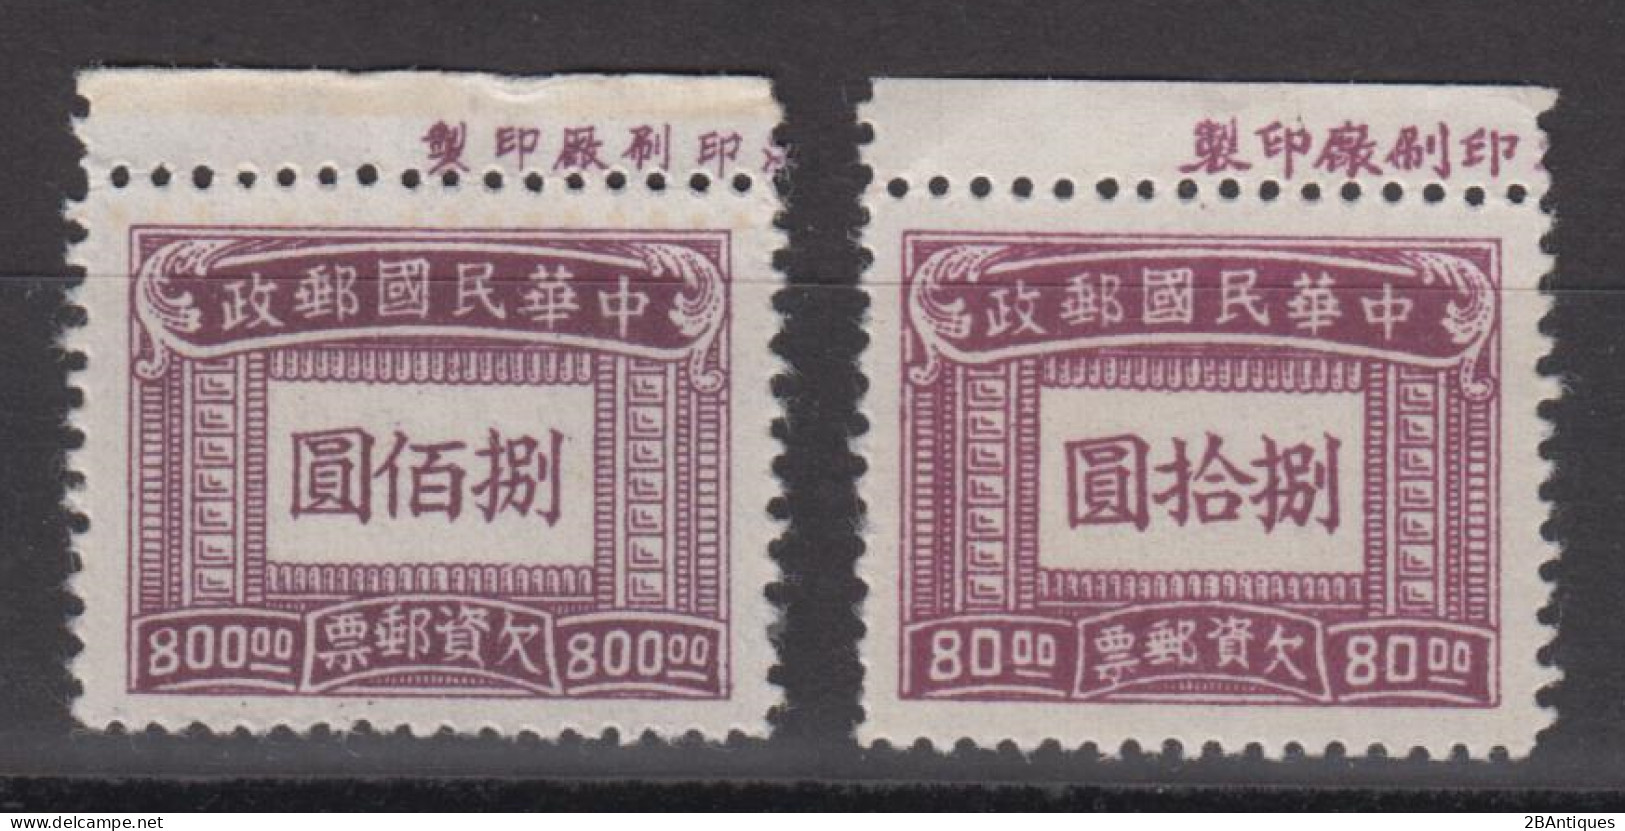 CHINA 1947 - Postage Due Stamps WITH MARGIN - 1912-1949 Republic